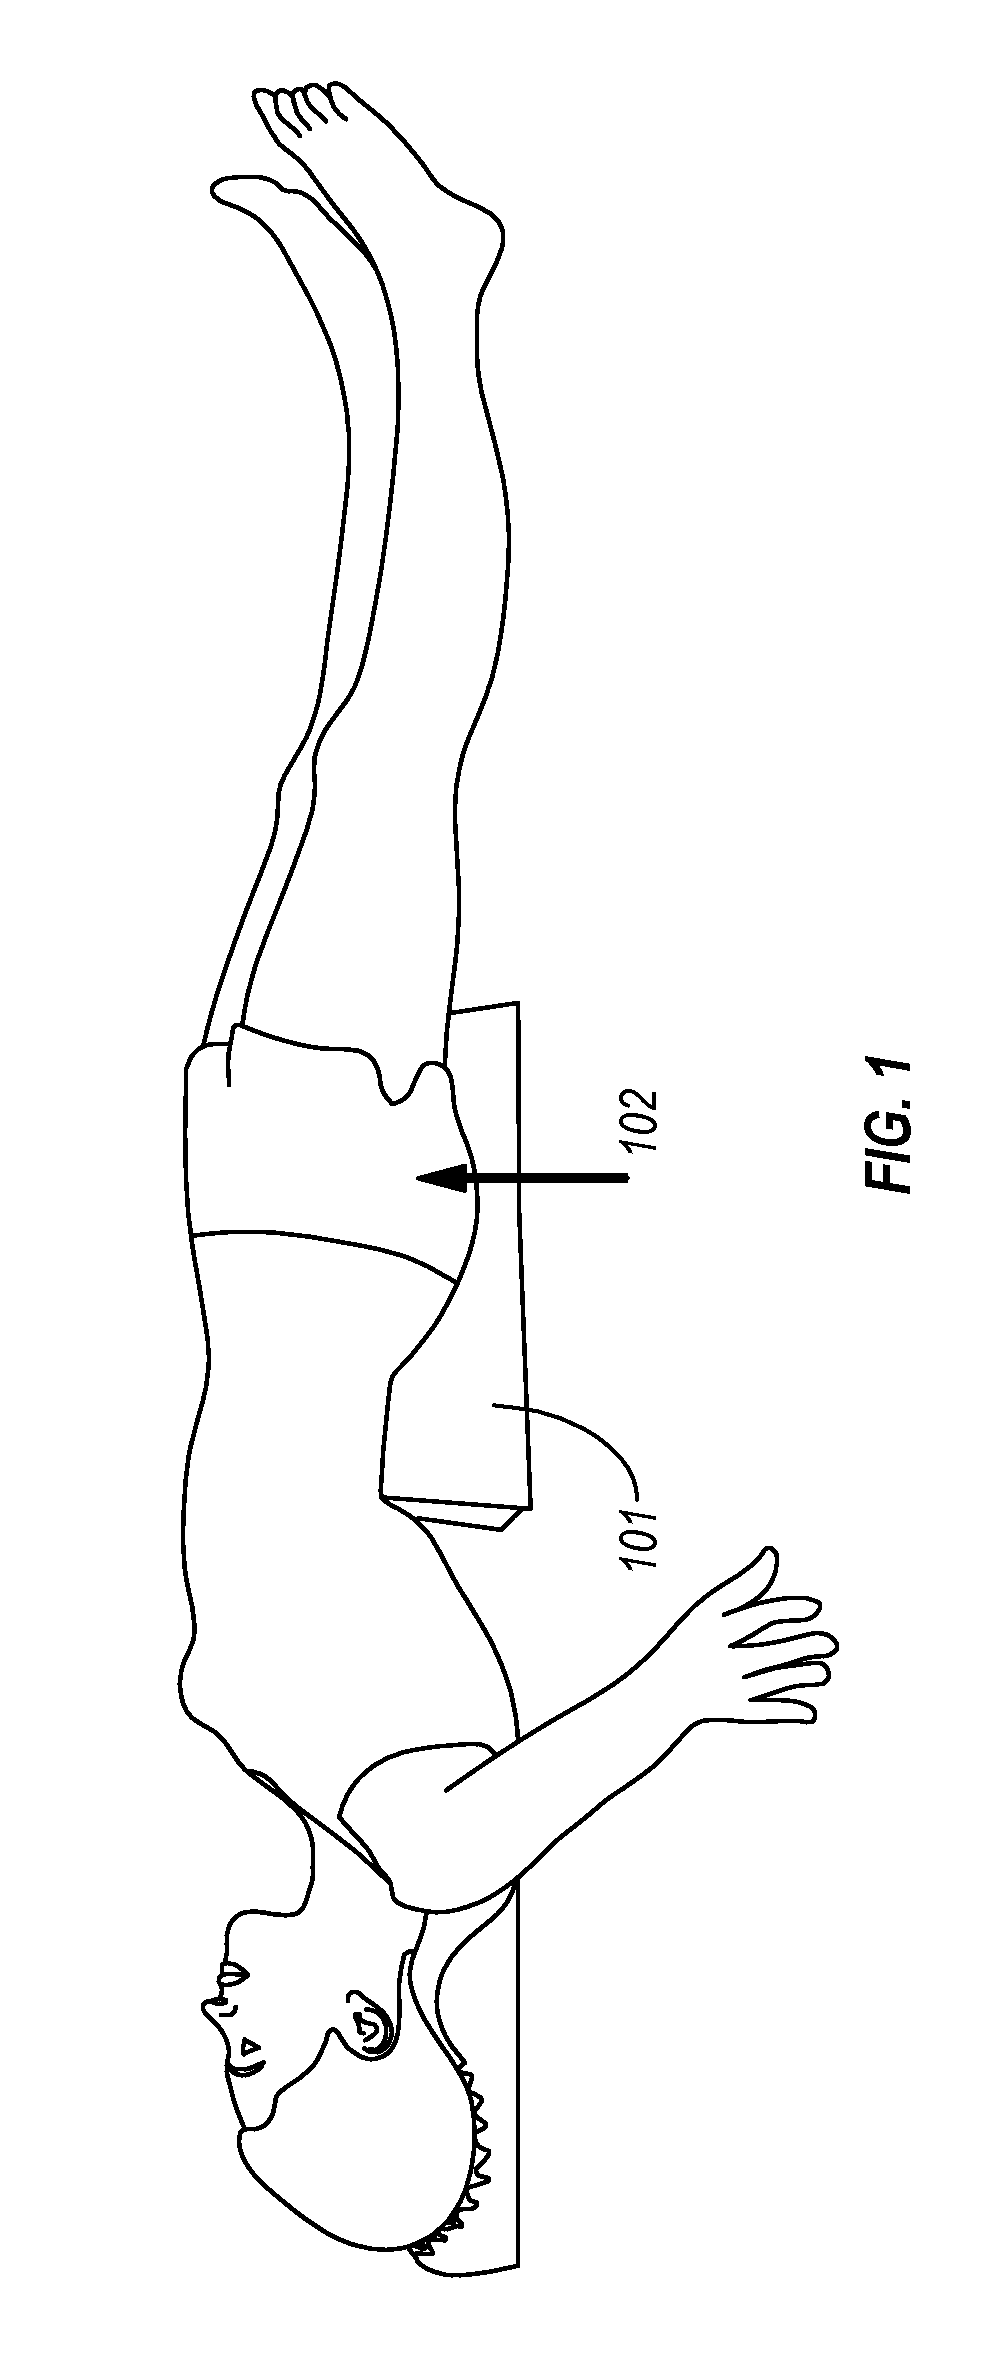 Device and method for pelvic elevation and stabilization of surgical patient